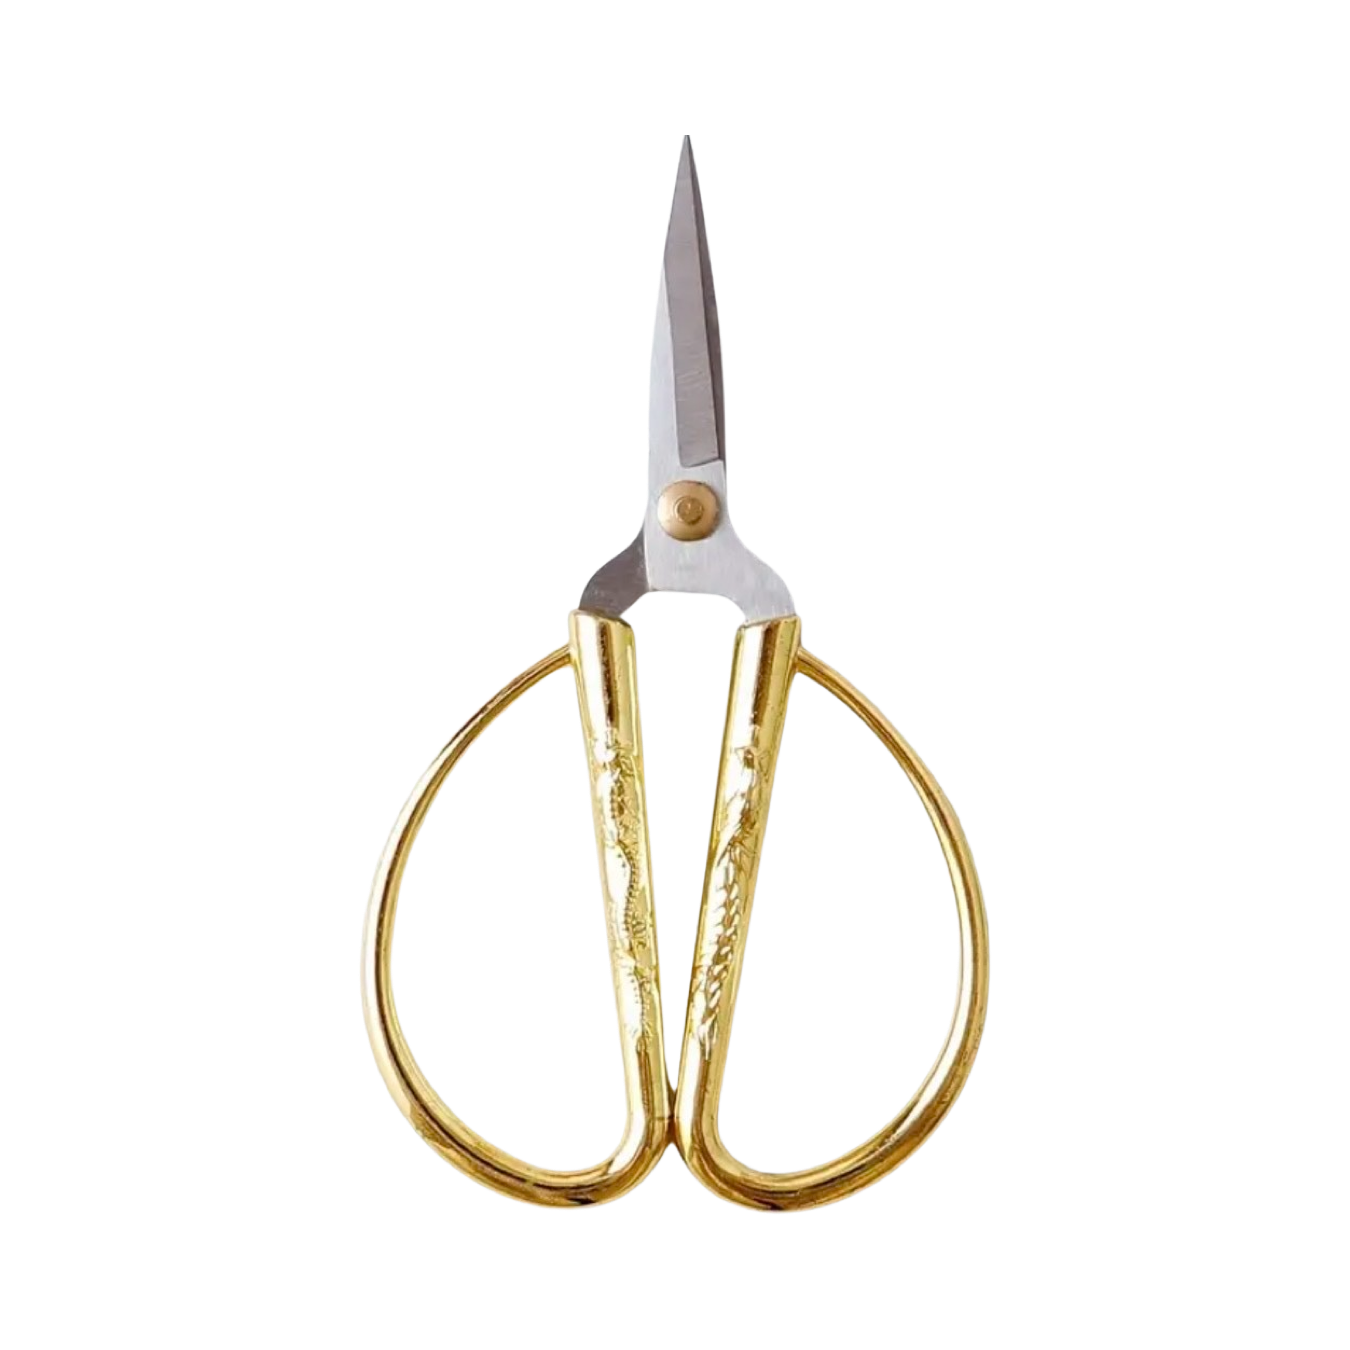 Impodimo Living & Giving:Grace Kitchen Scissors:Swing Gifts